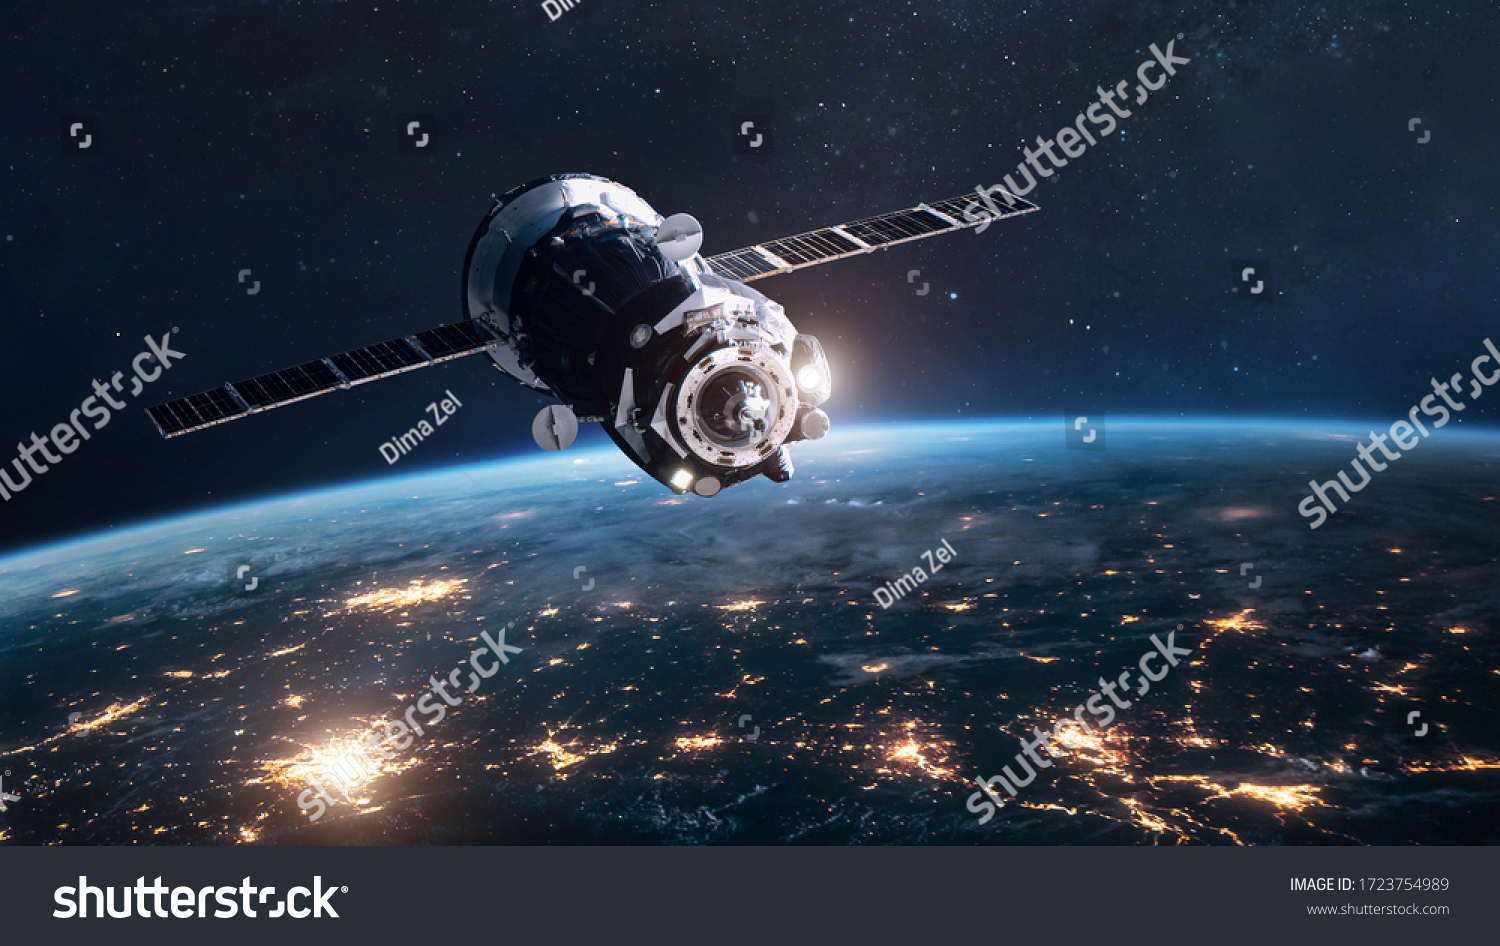 Cargo spaceship on orbit of planet Earth. Expedition on ISS station. Exploration of space. Elements of this image furnished by NASA #1723754989